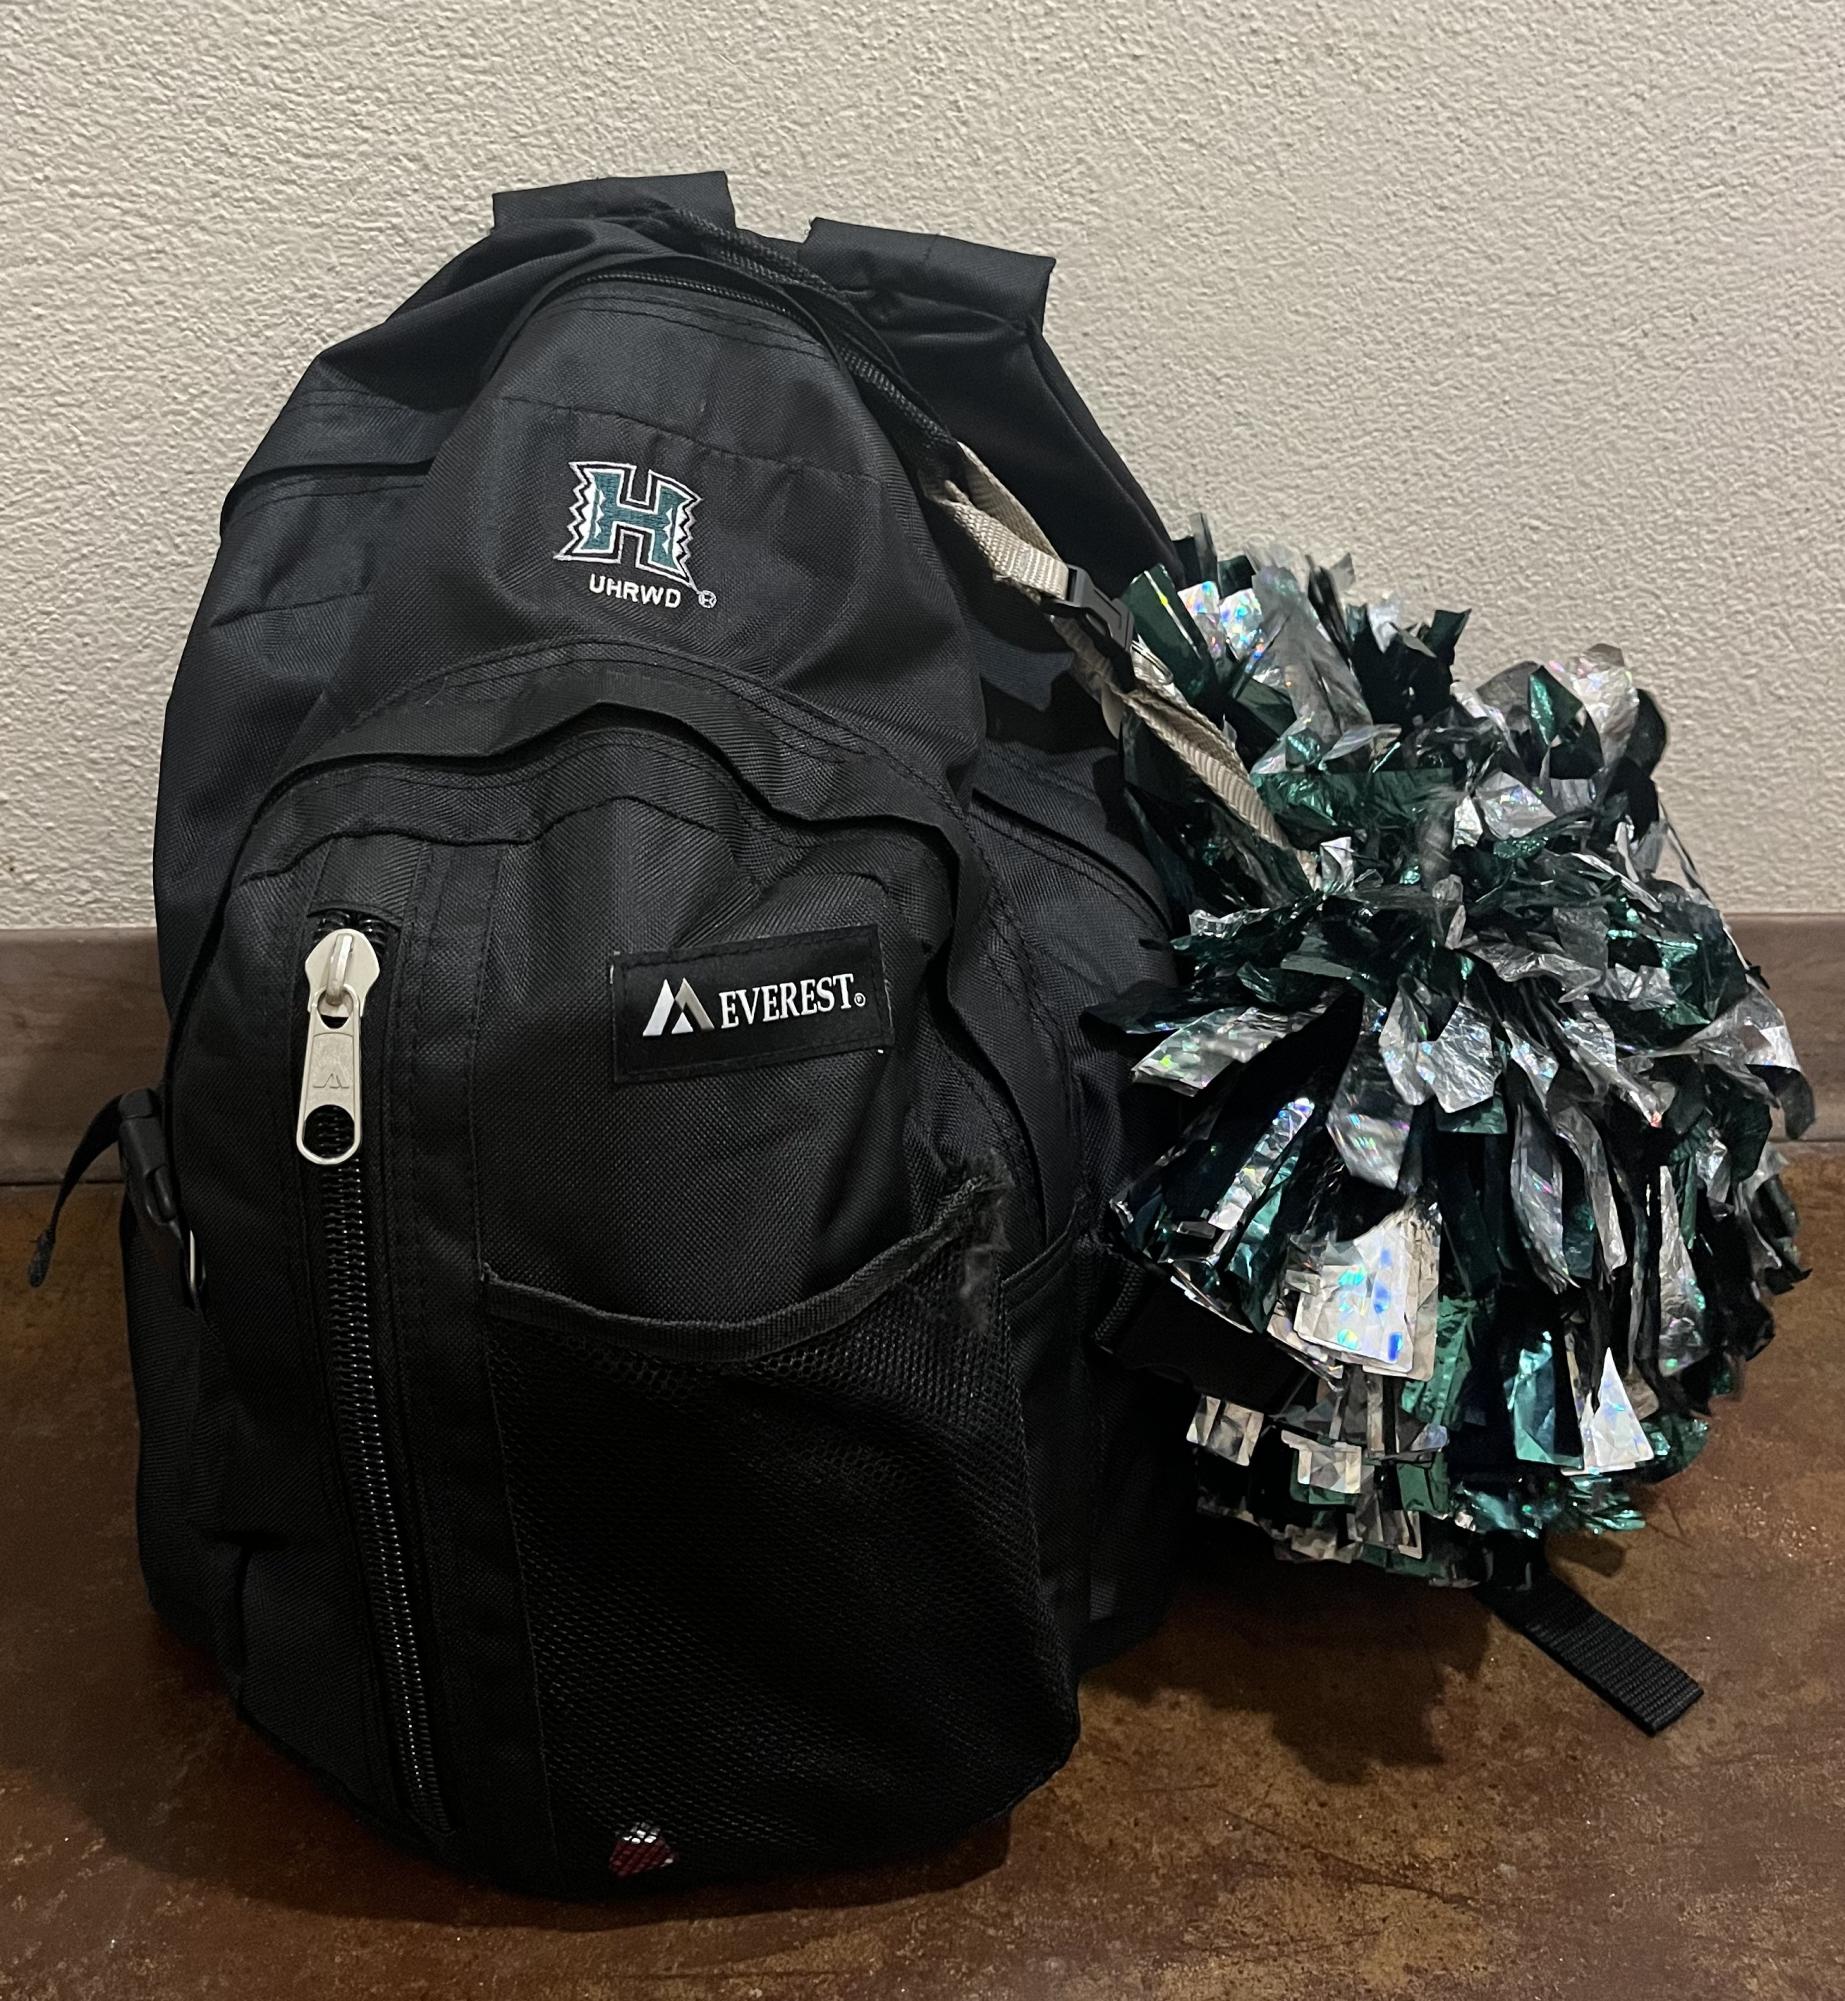 Hailey Bretons dance bag tells only part of her story as a UH dancer. Photo courtesy of Hailey Breton.